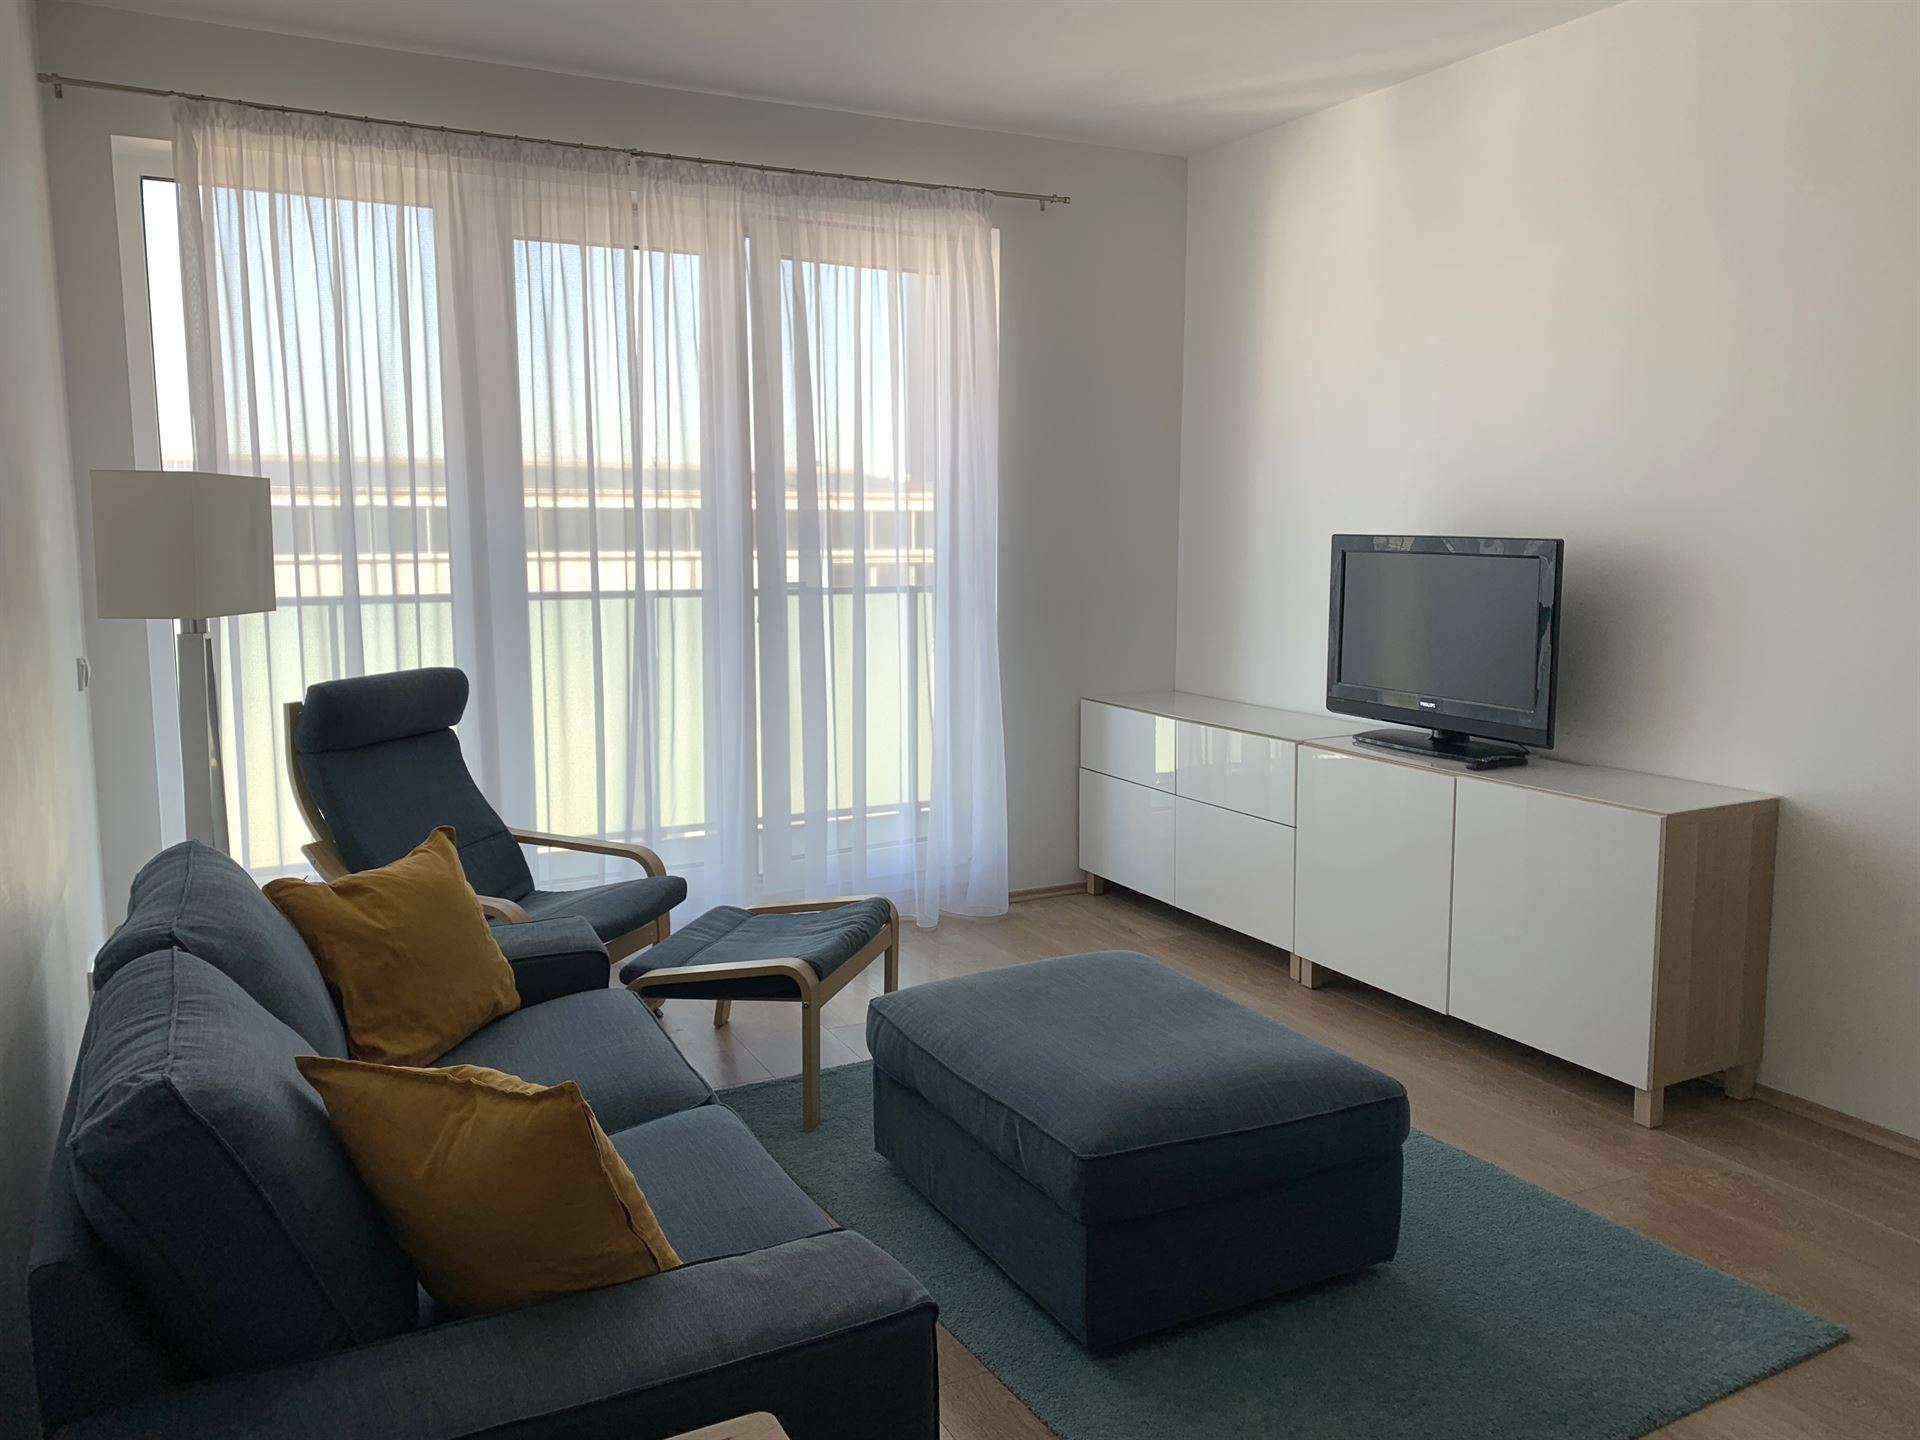 budapest-rental-long-term-property-for-rent-district-13-flat-for-rent-new-condo-rental4